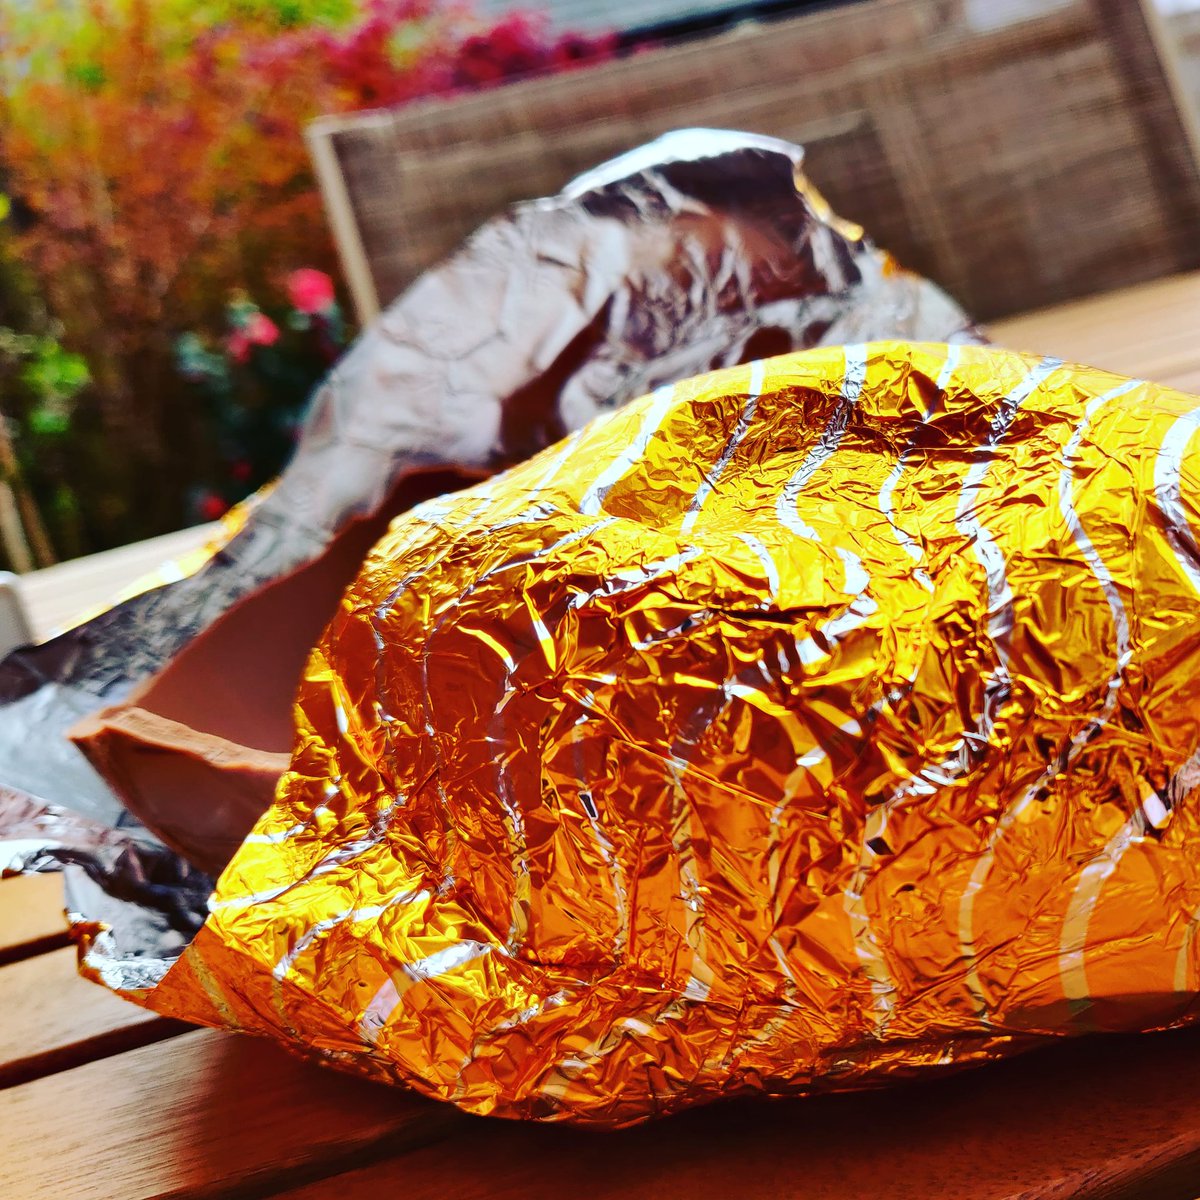 The gold foil wrapper made me wonder if I could build a model of an  #Apollo LEM, so I've had to devour a whole  #EasterEgg in the pursuit of Computer Science. 